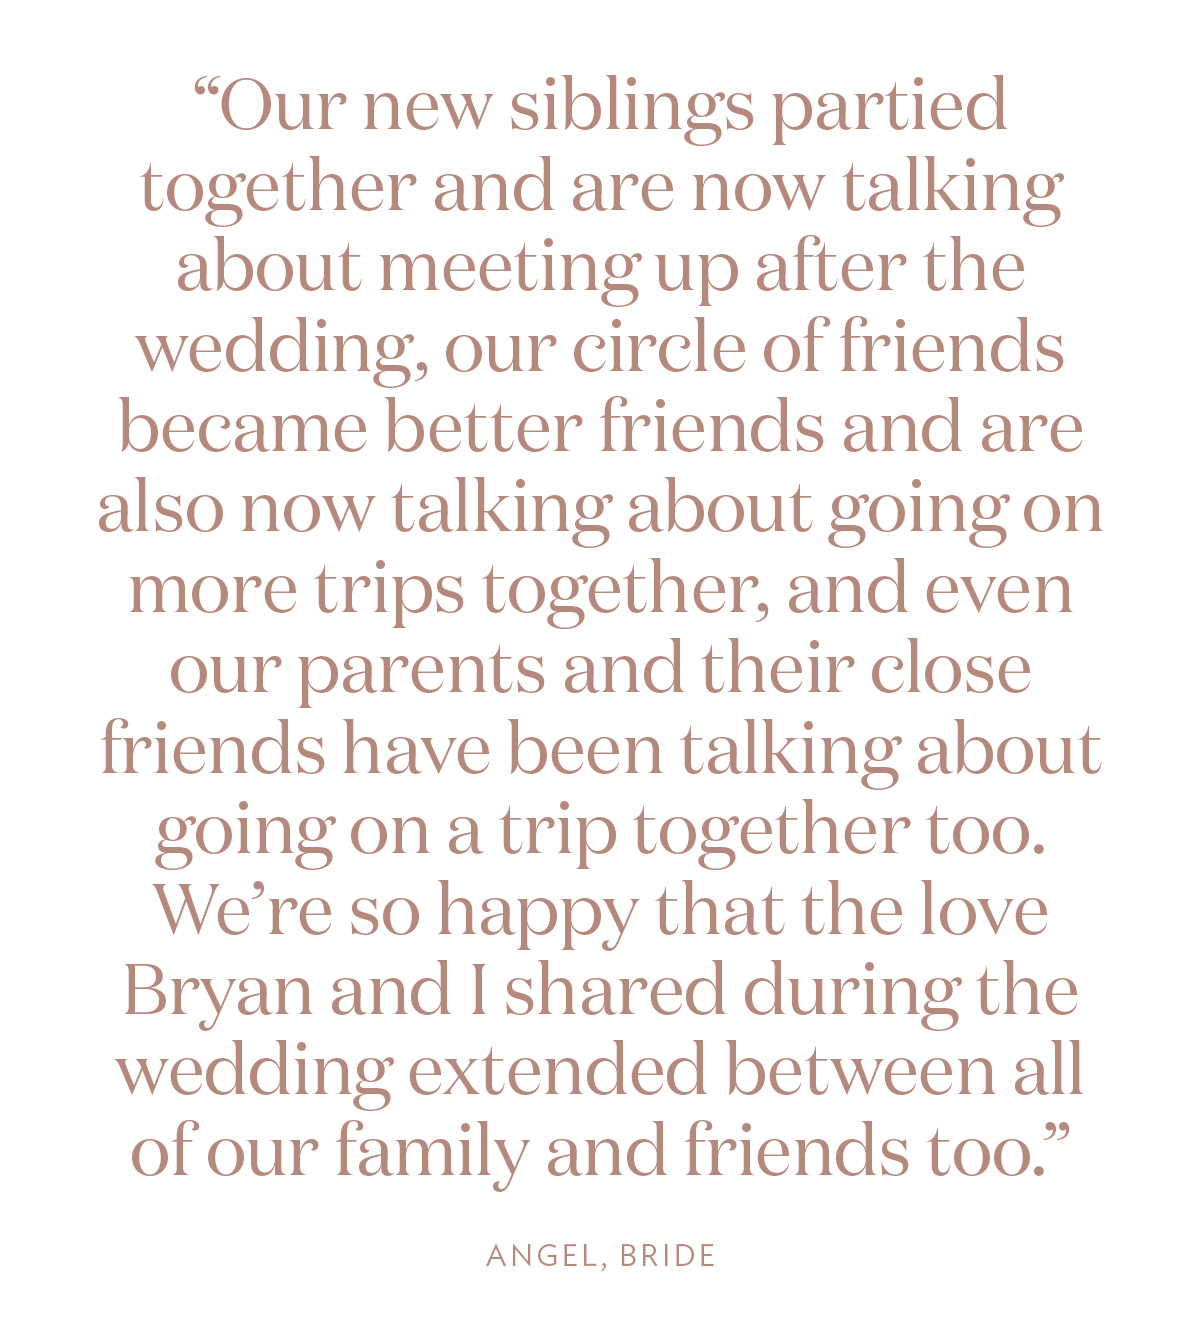 “Our new siblings partied together and are now talking about meeting up after the wedding, our circle of friends became better friends and are also now talking about going on more trips together, and even our parents and their close friends have been talking about going on a trip together too. We’re so happy that the love Bryan and I shared during the wedding extended between all of our family and friends too.” Angel, Bride